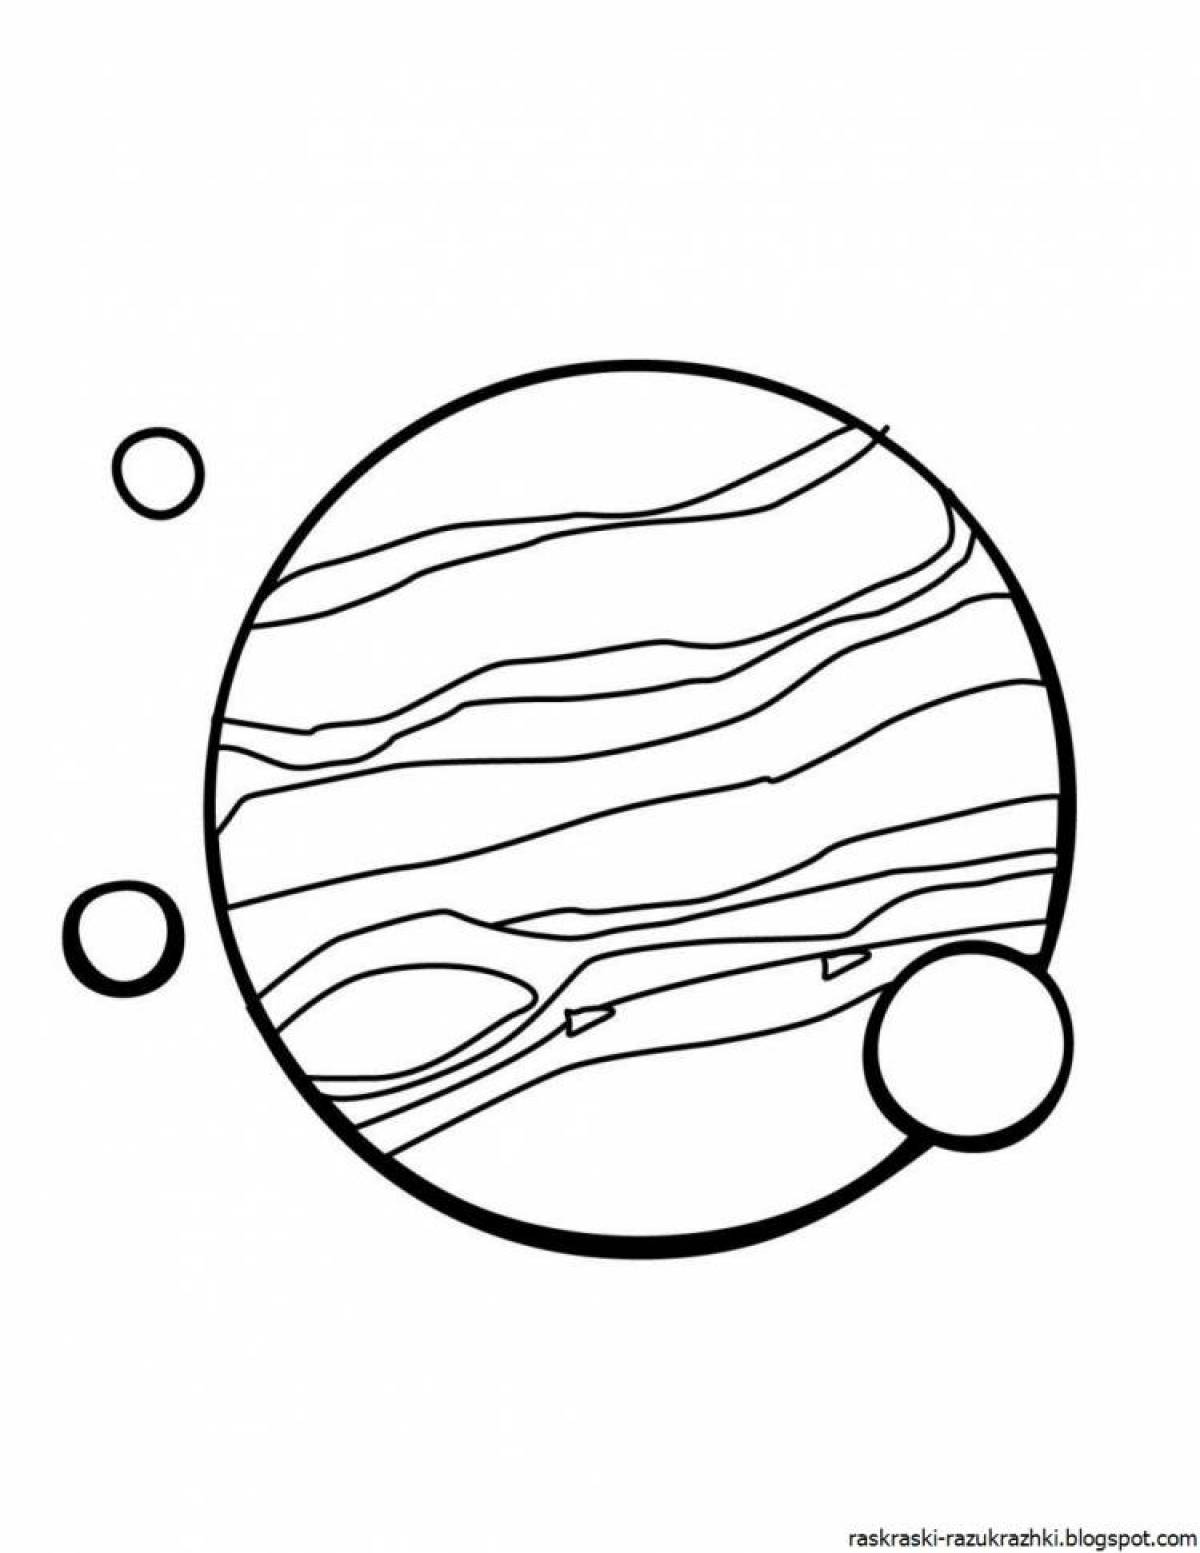 Attractive planet coloring book for kids